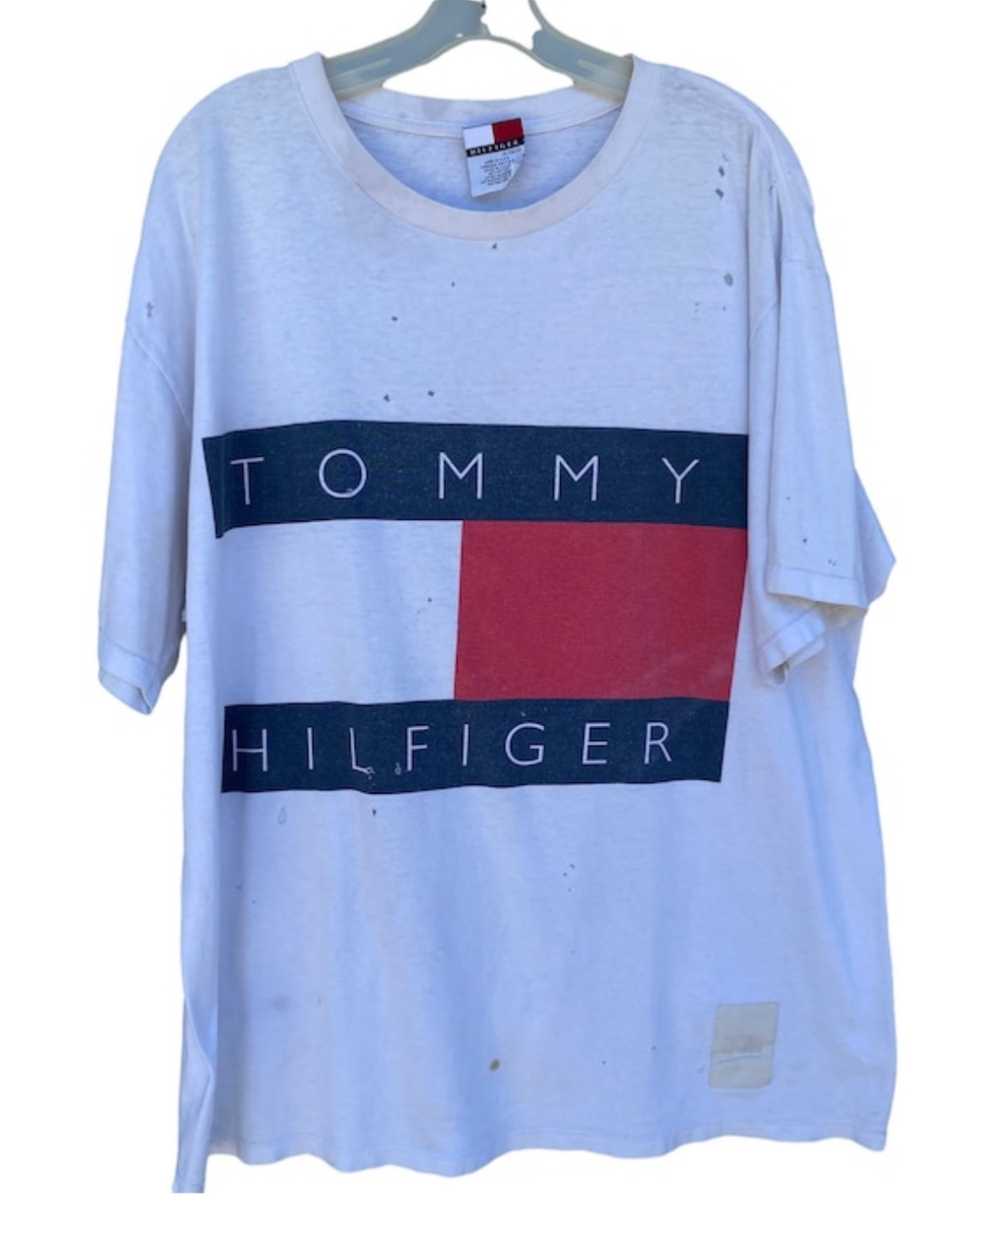 90s Tommy Hilfiger Classic Tee - image 1